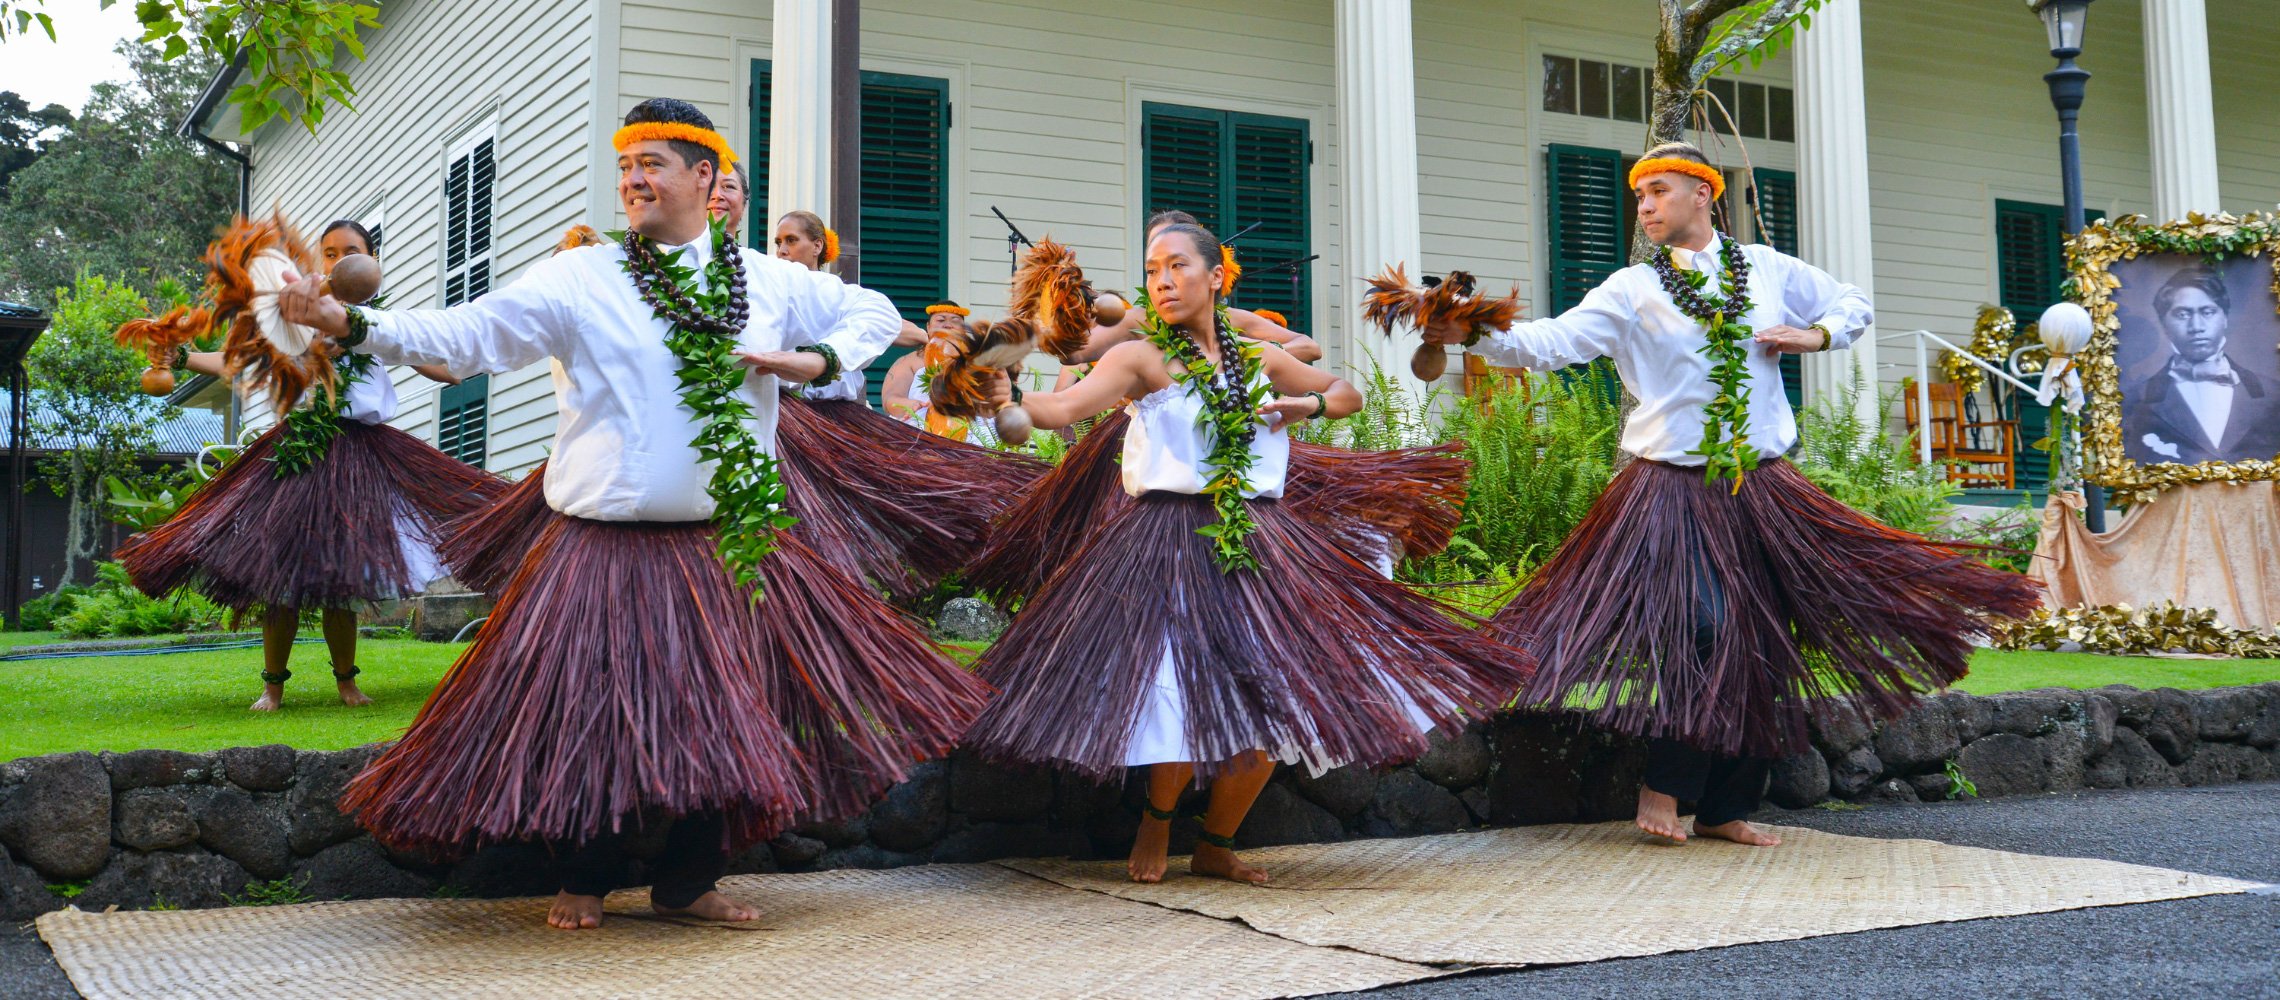 Hula dancers in front of building